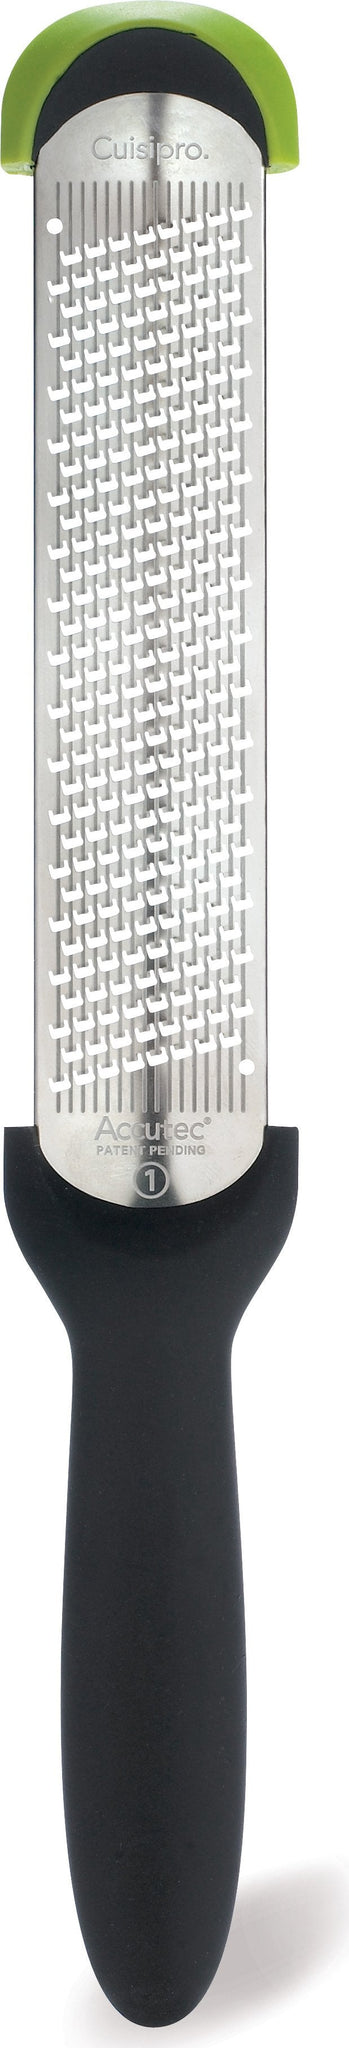 Cuisipro - 11.5" SGT Fine Rasp Grater - 747161